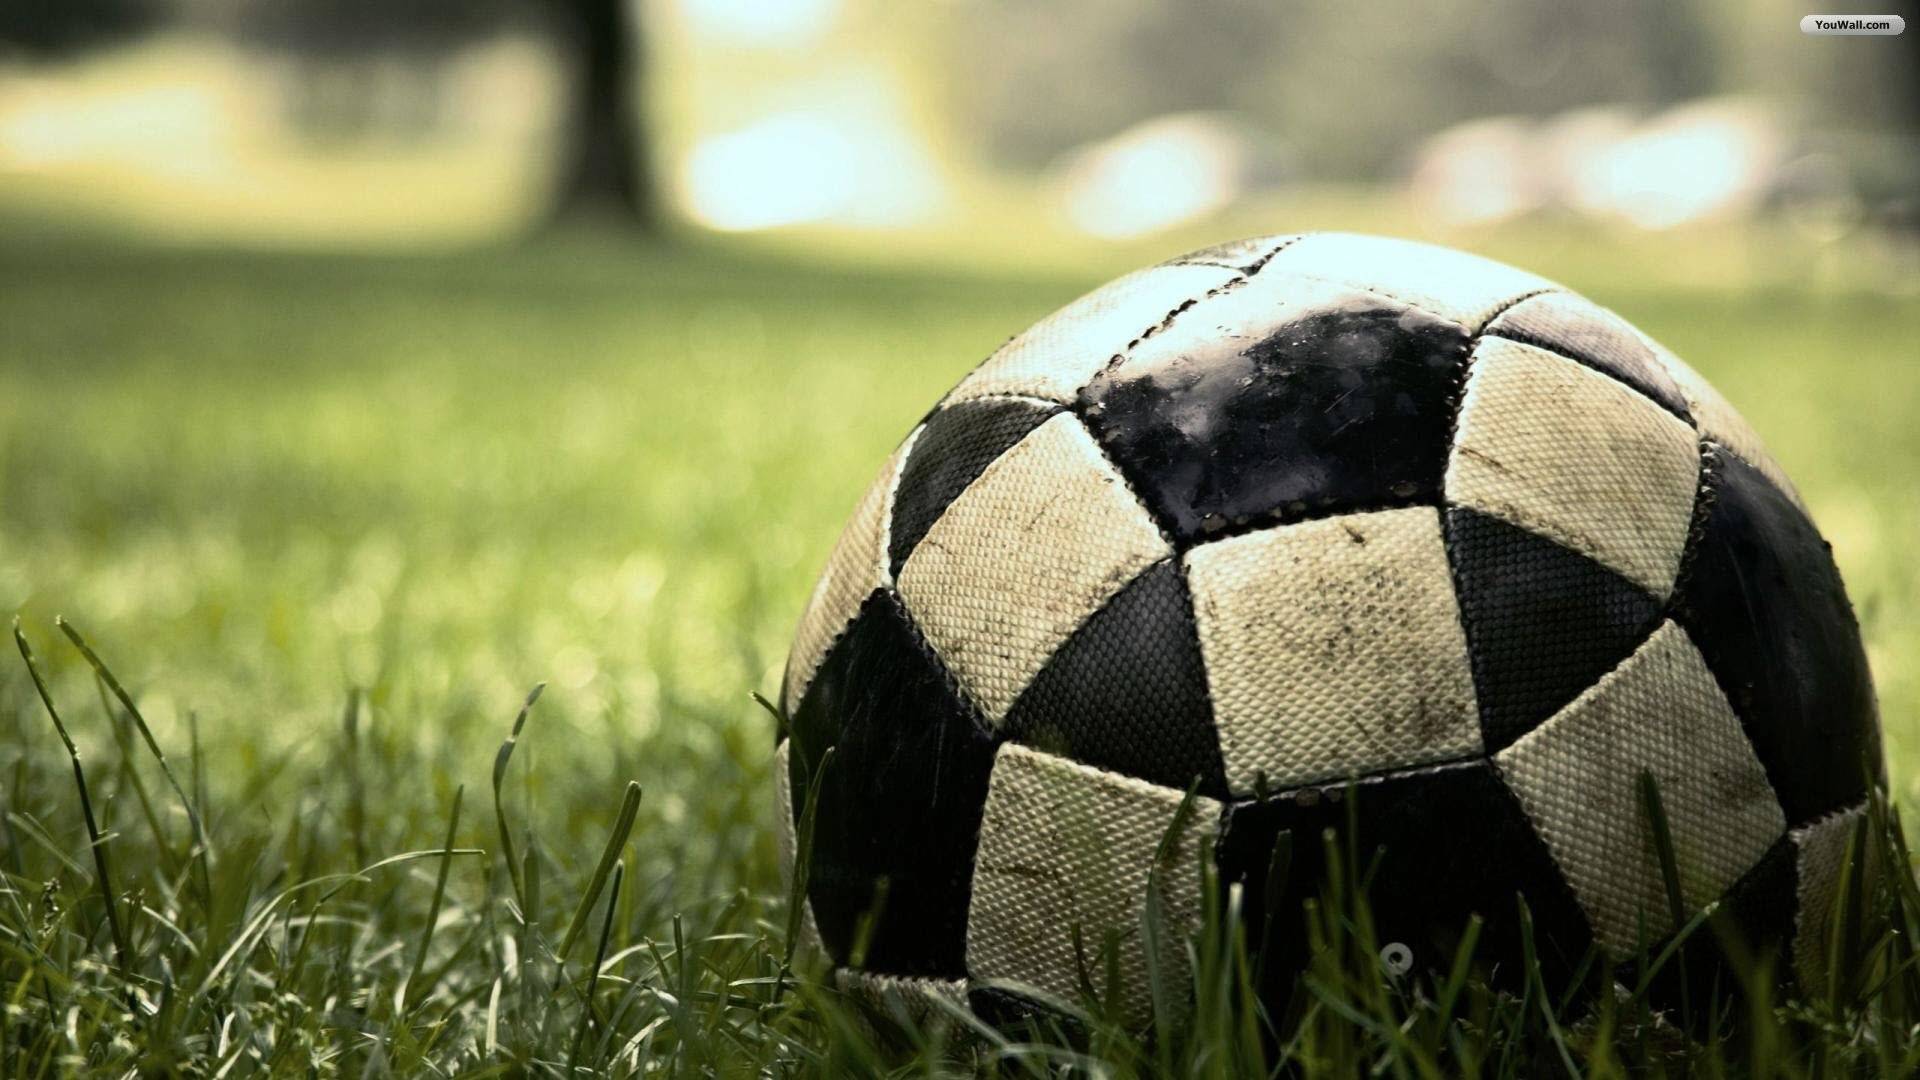 Soccer Background Hd